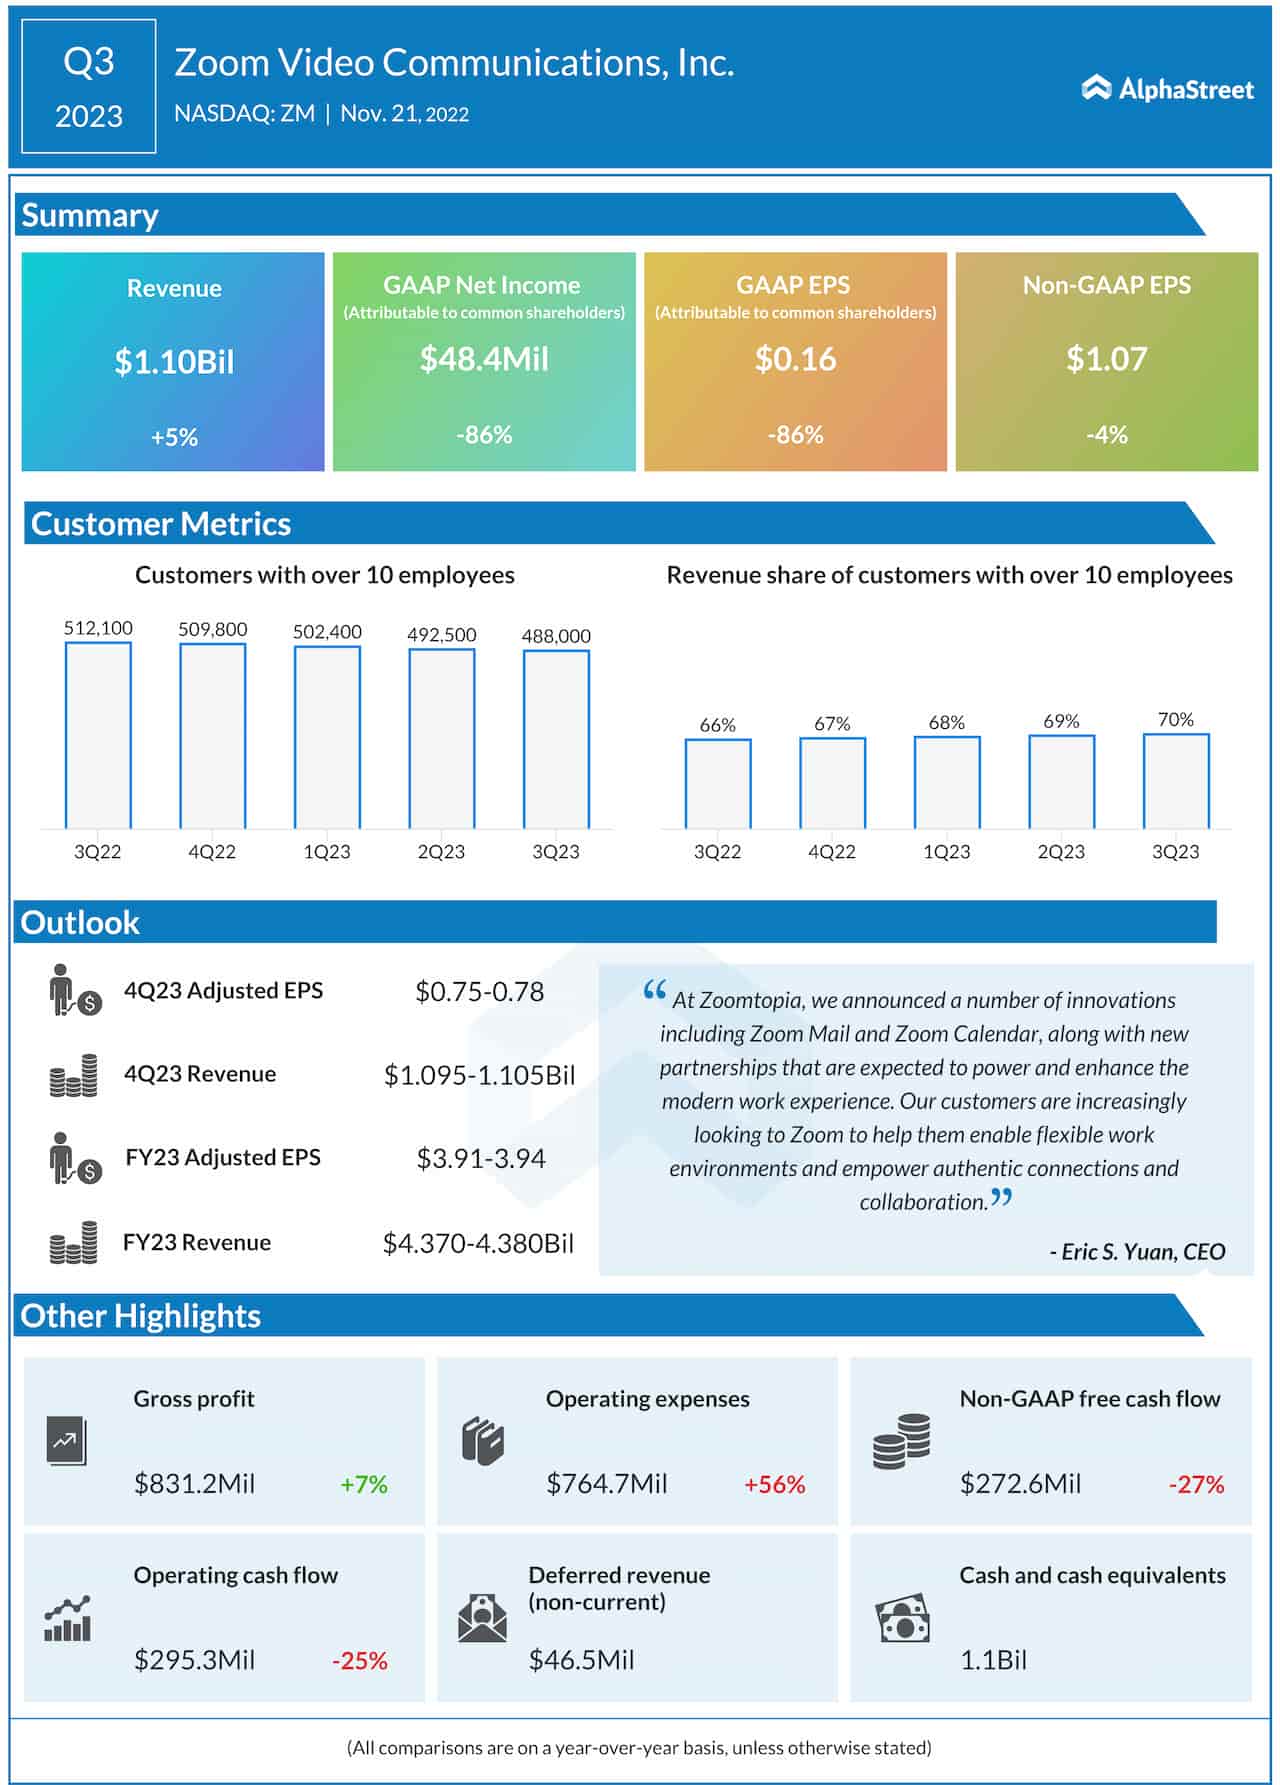 Zoom Video Communications Q3 2023 earnings infographic